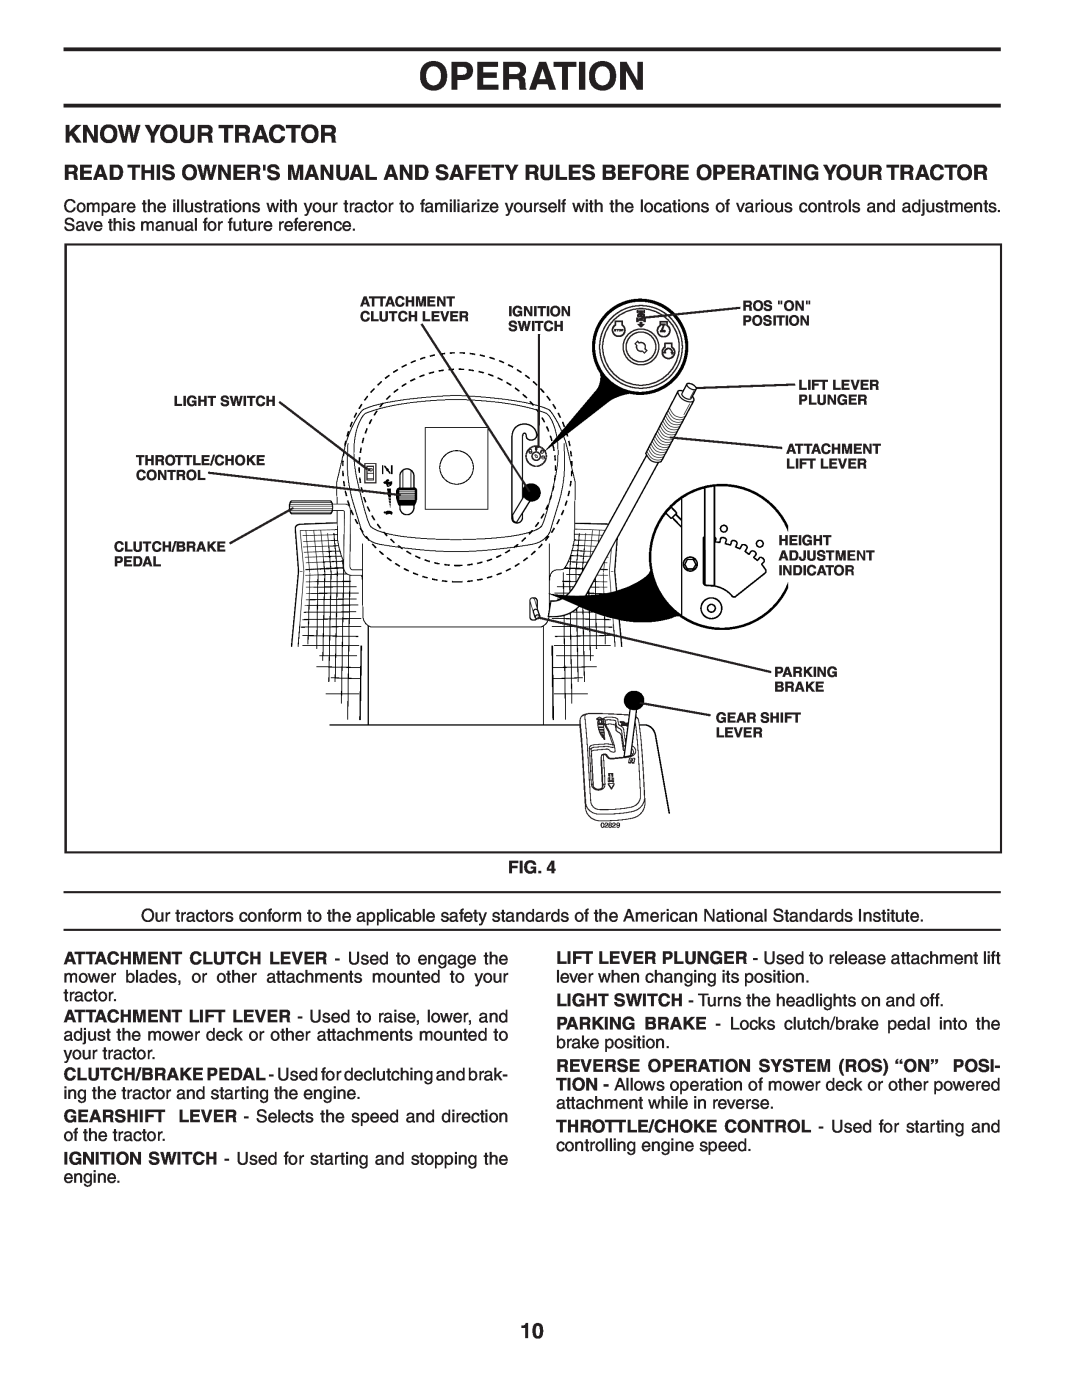 Poulan HD17542 manual Know Your Tractor, Operation 